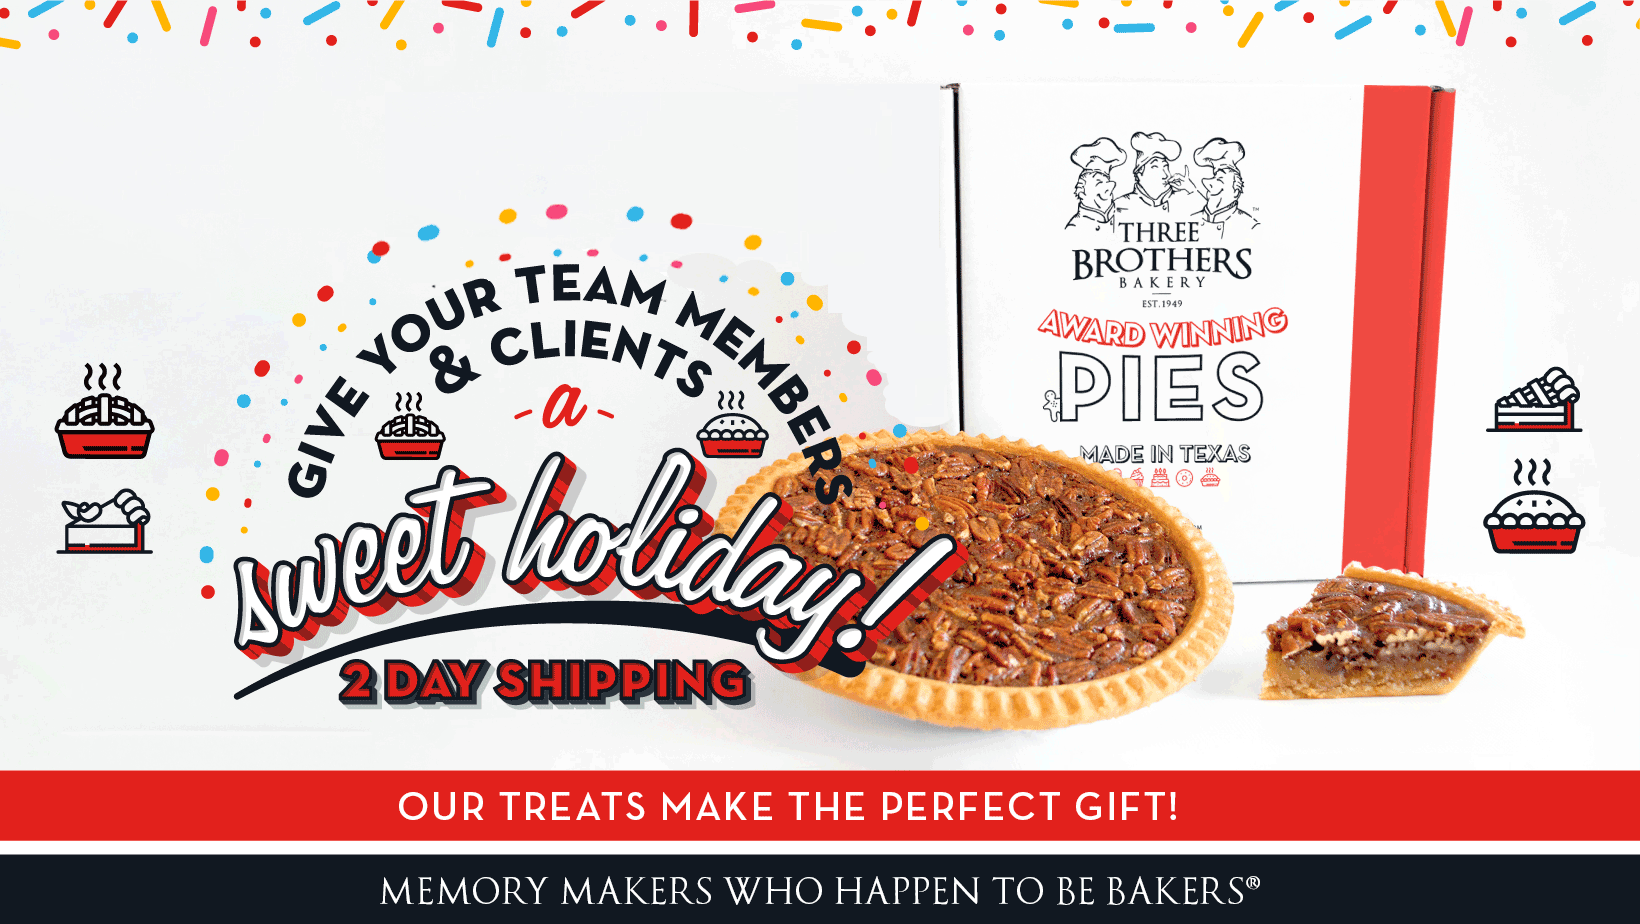 Corporate Gifts - Business Gifts - Easy as Pie!